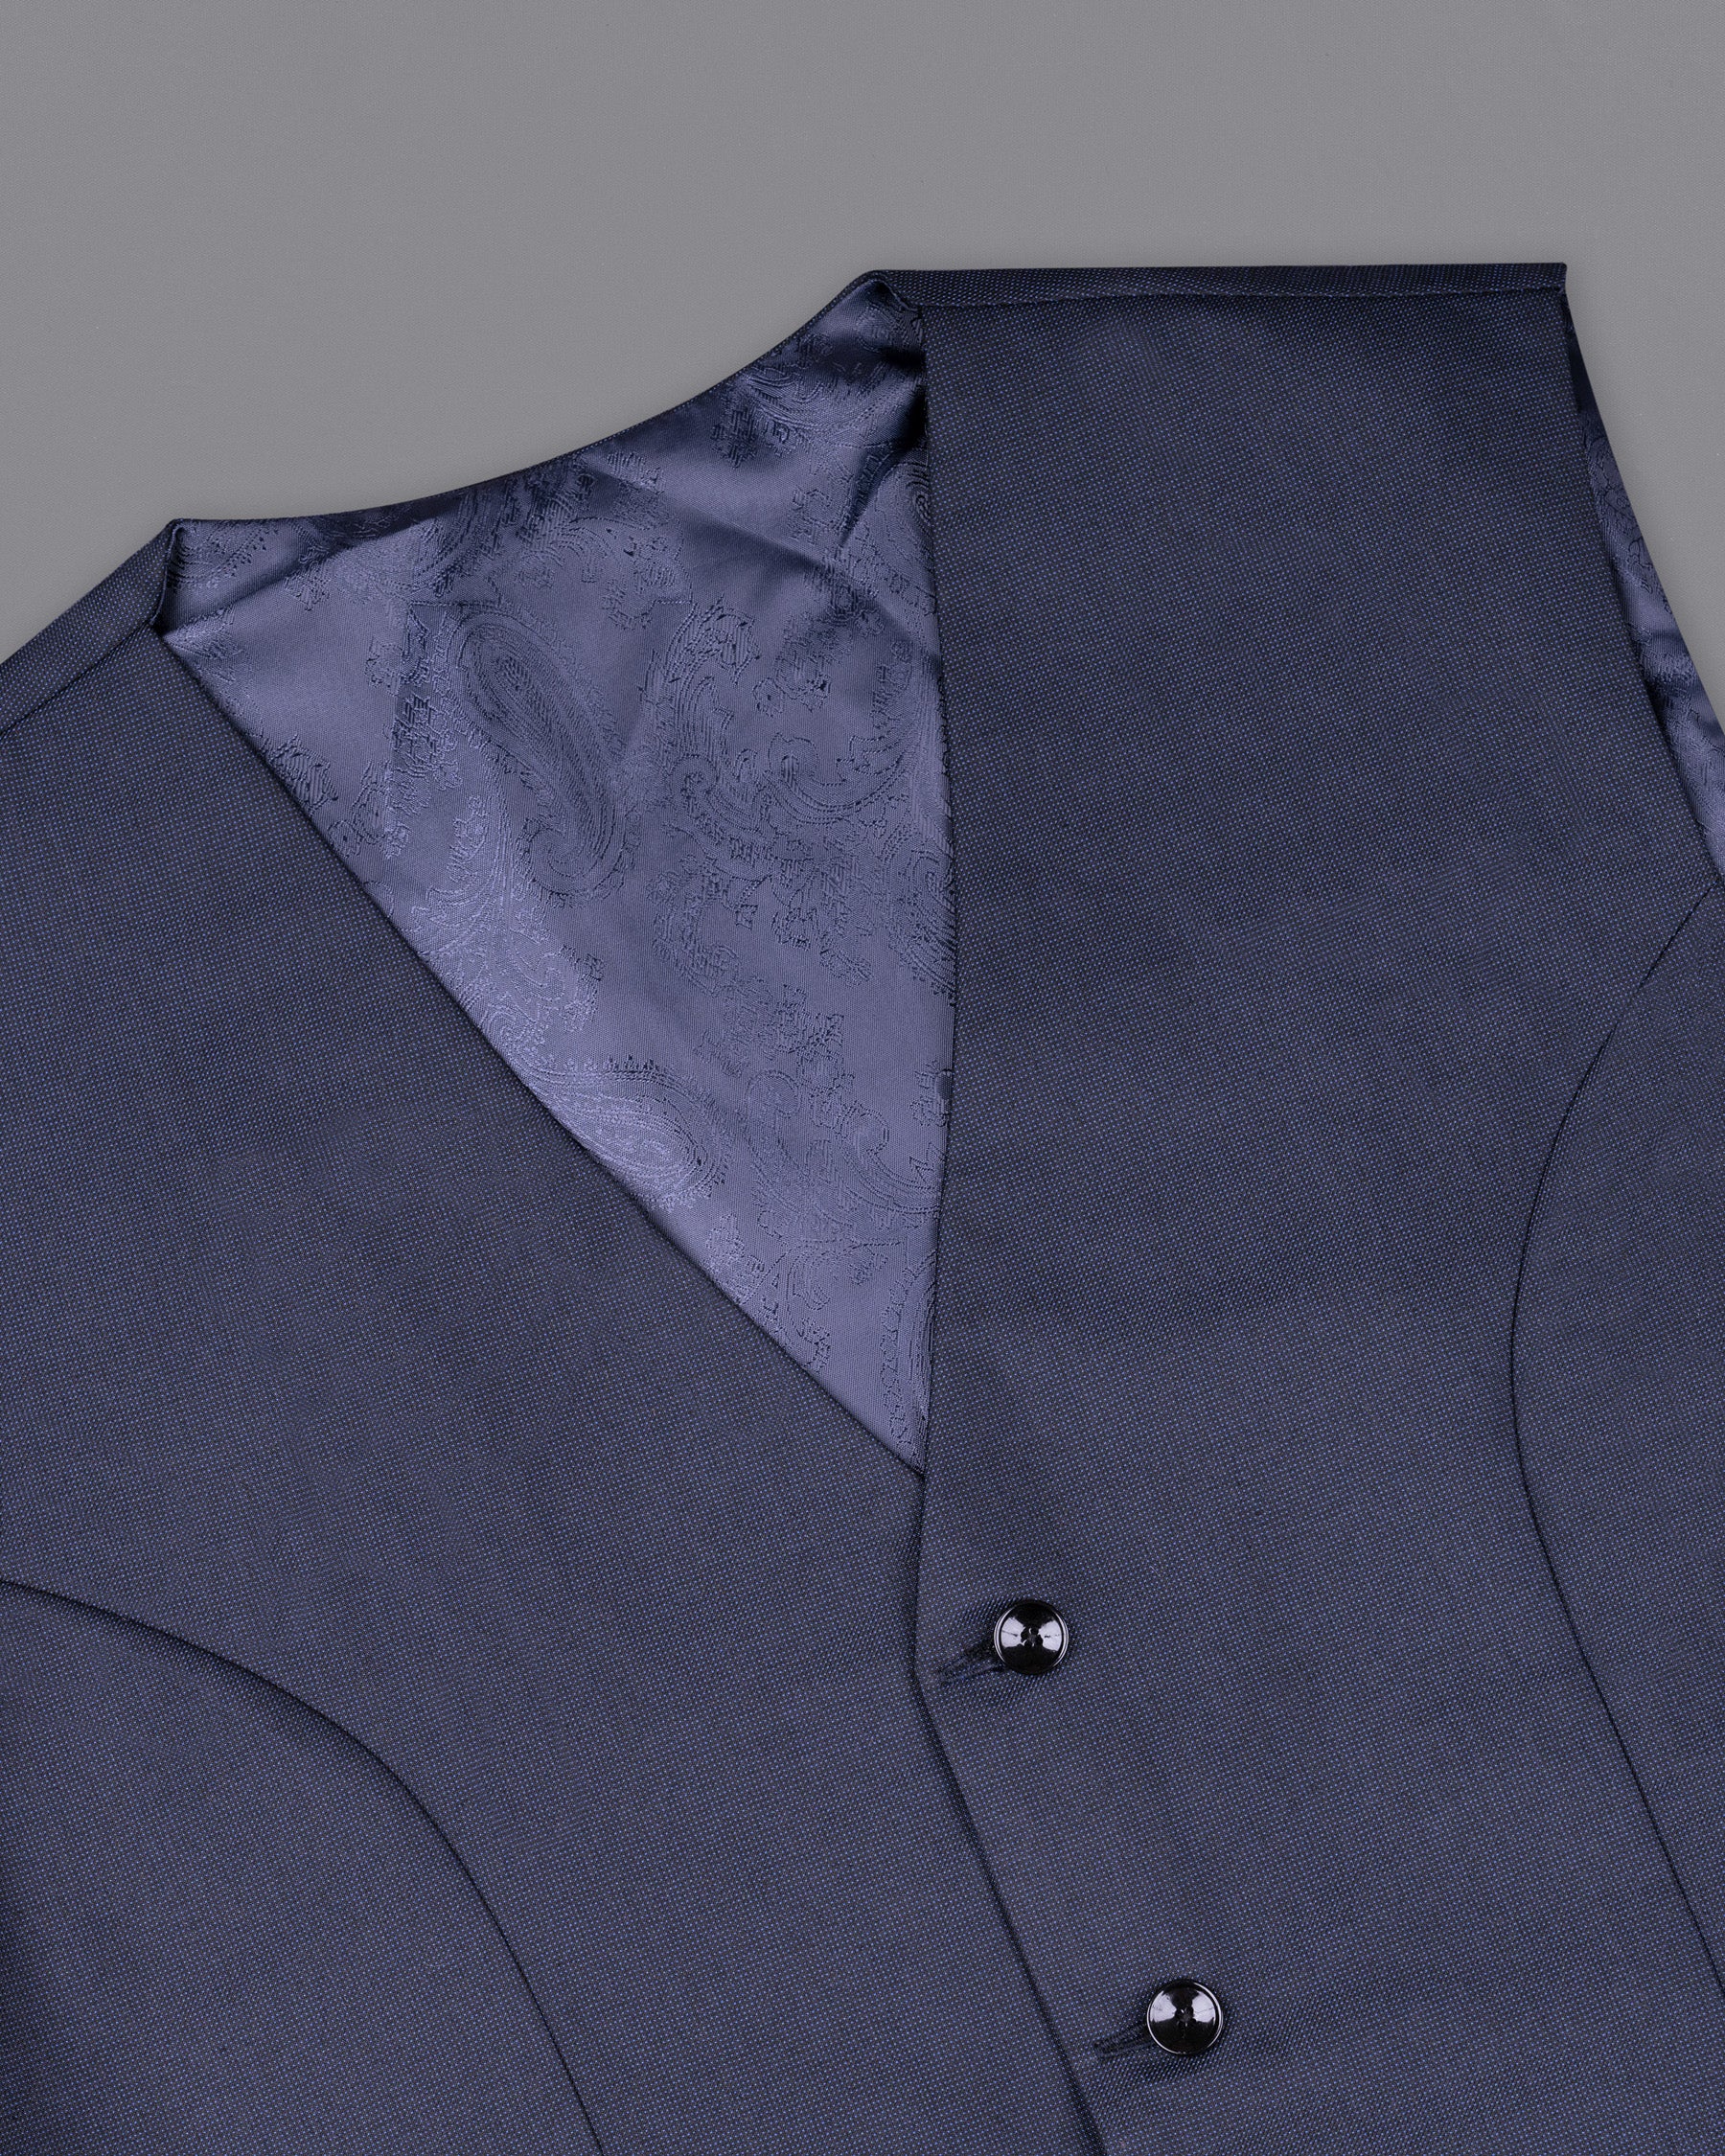 River Bed Blue Textured Waistcoat